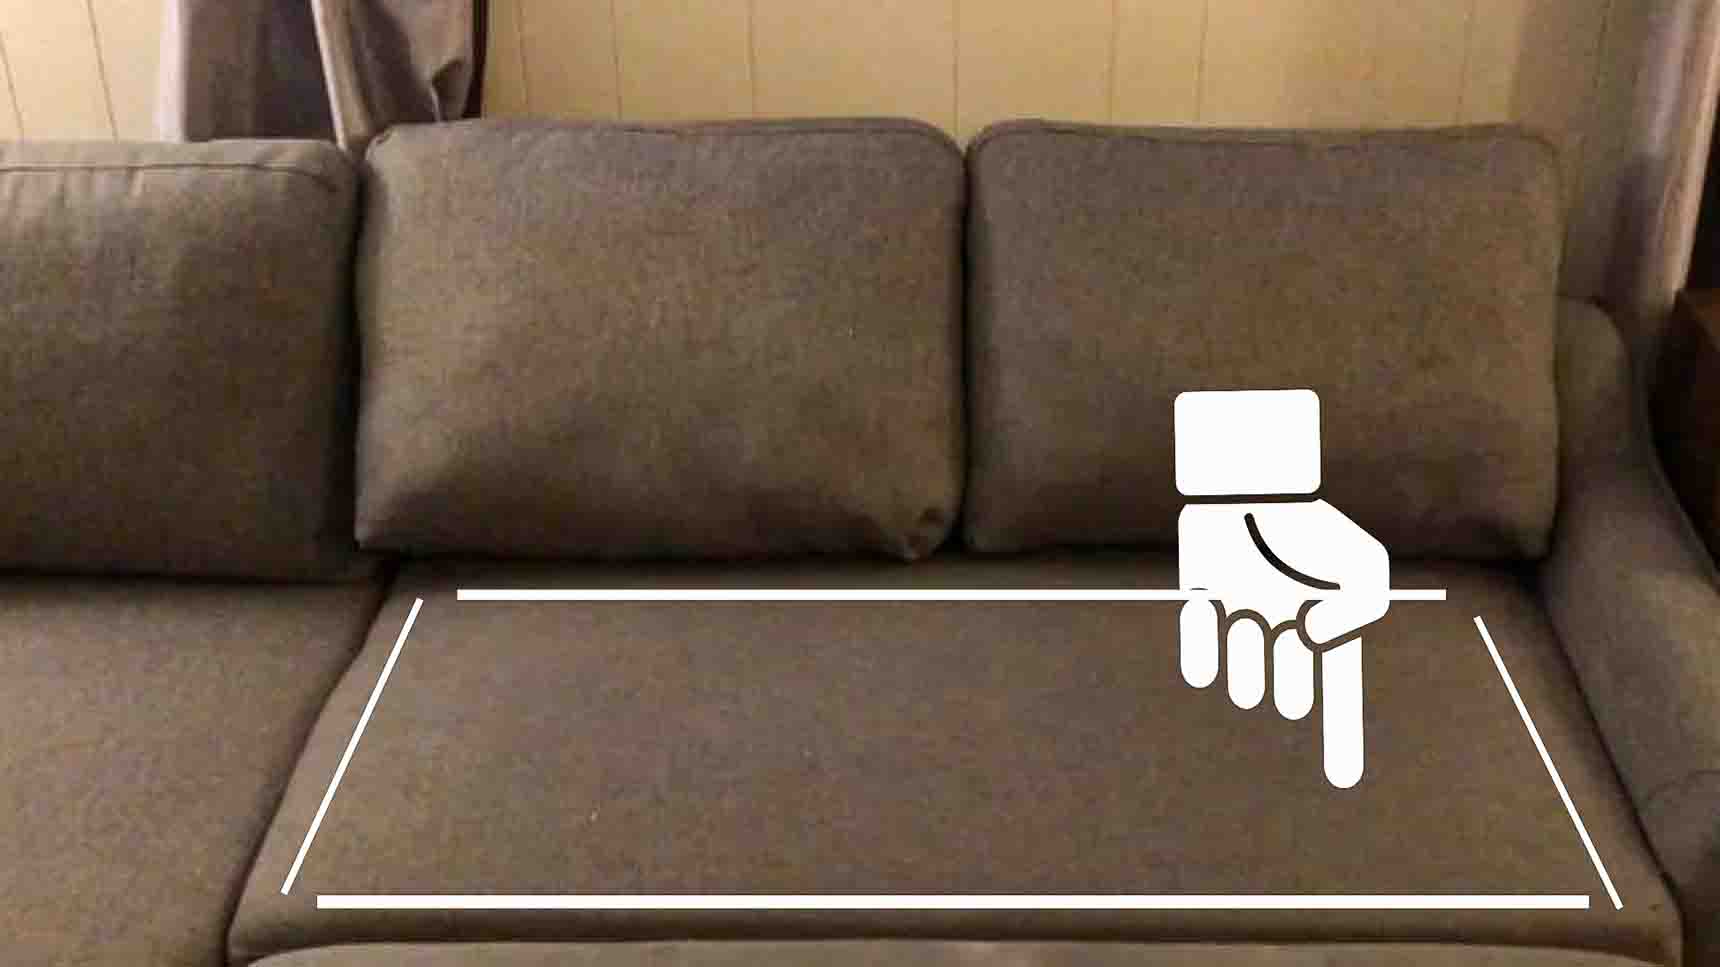 Easy & Cheap Tips To Fix a Sagging Couch